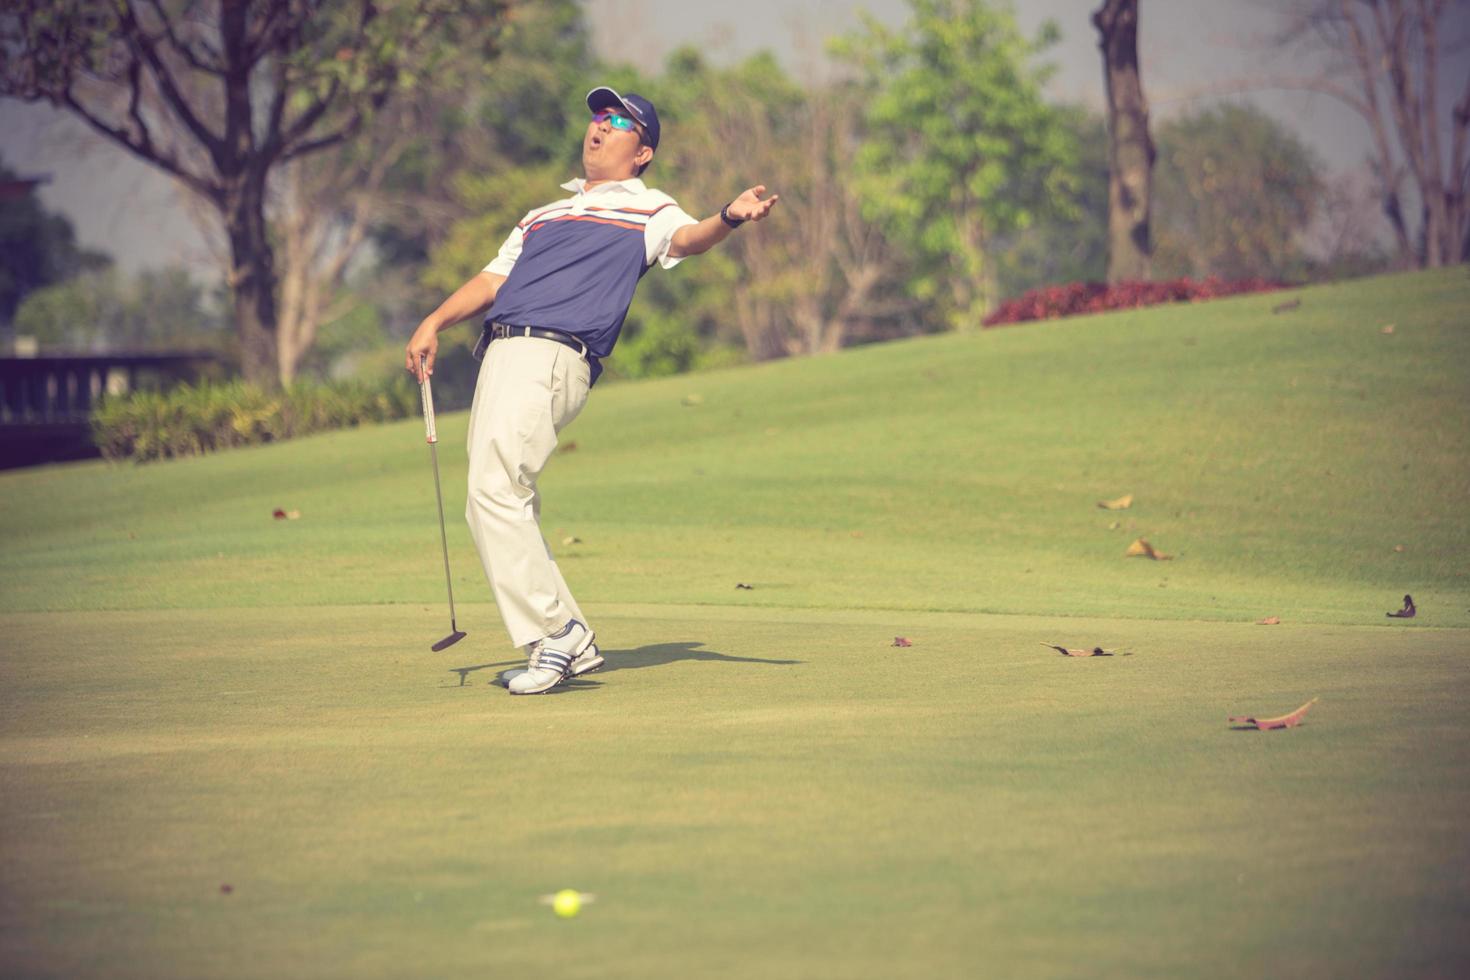 Golf player at the putting green hitting ball into a hole.Vintage color photo